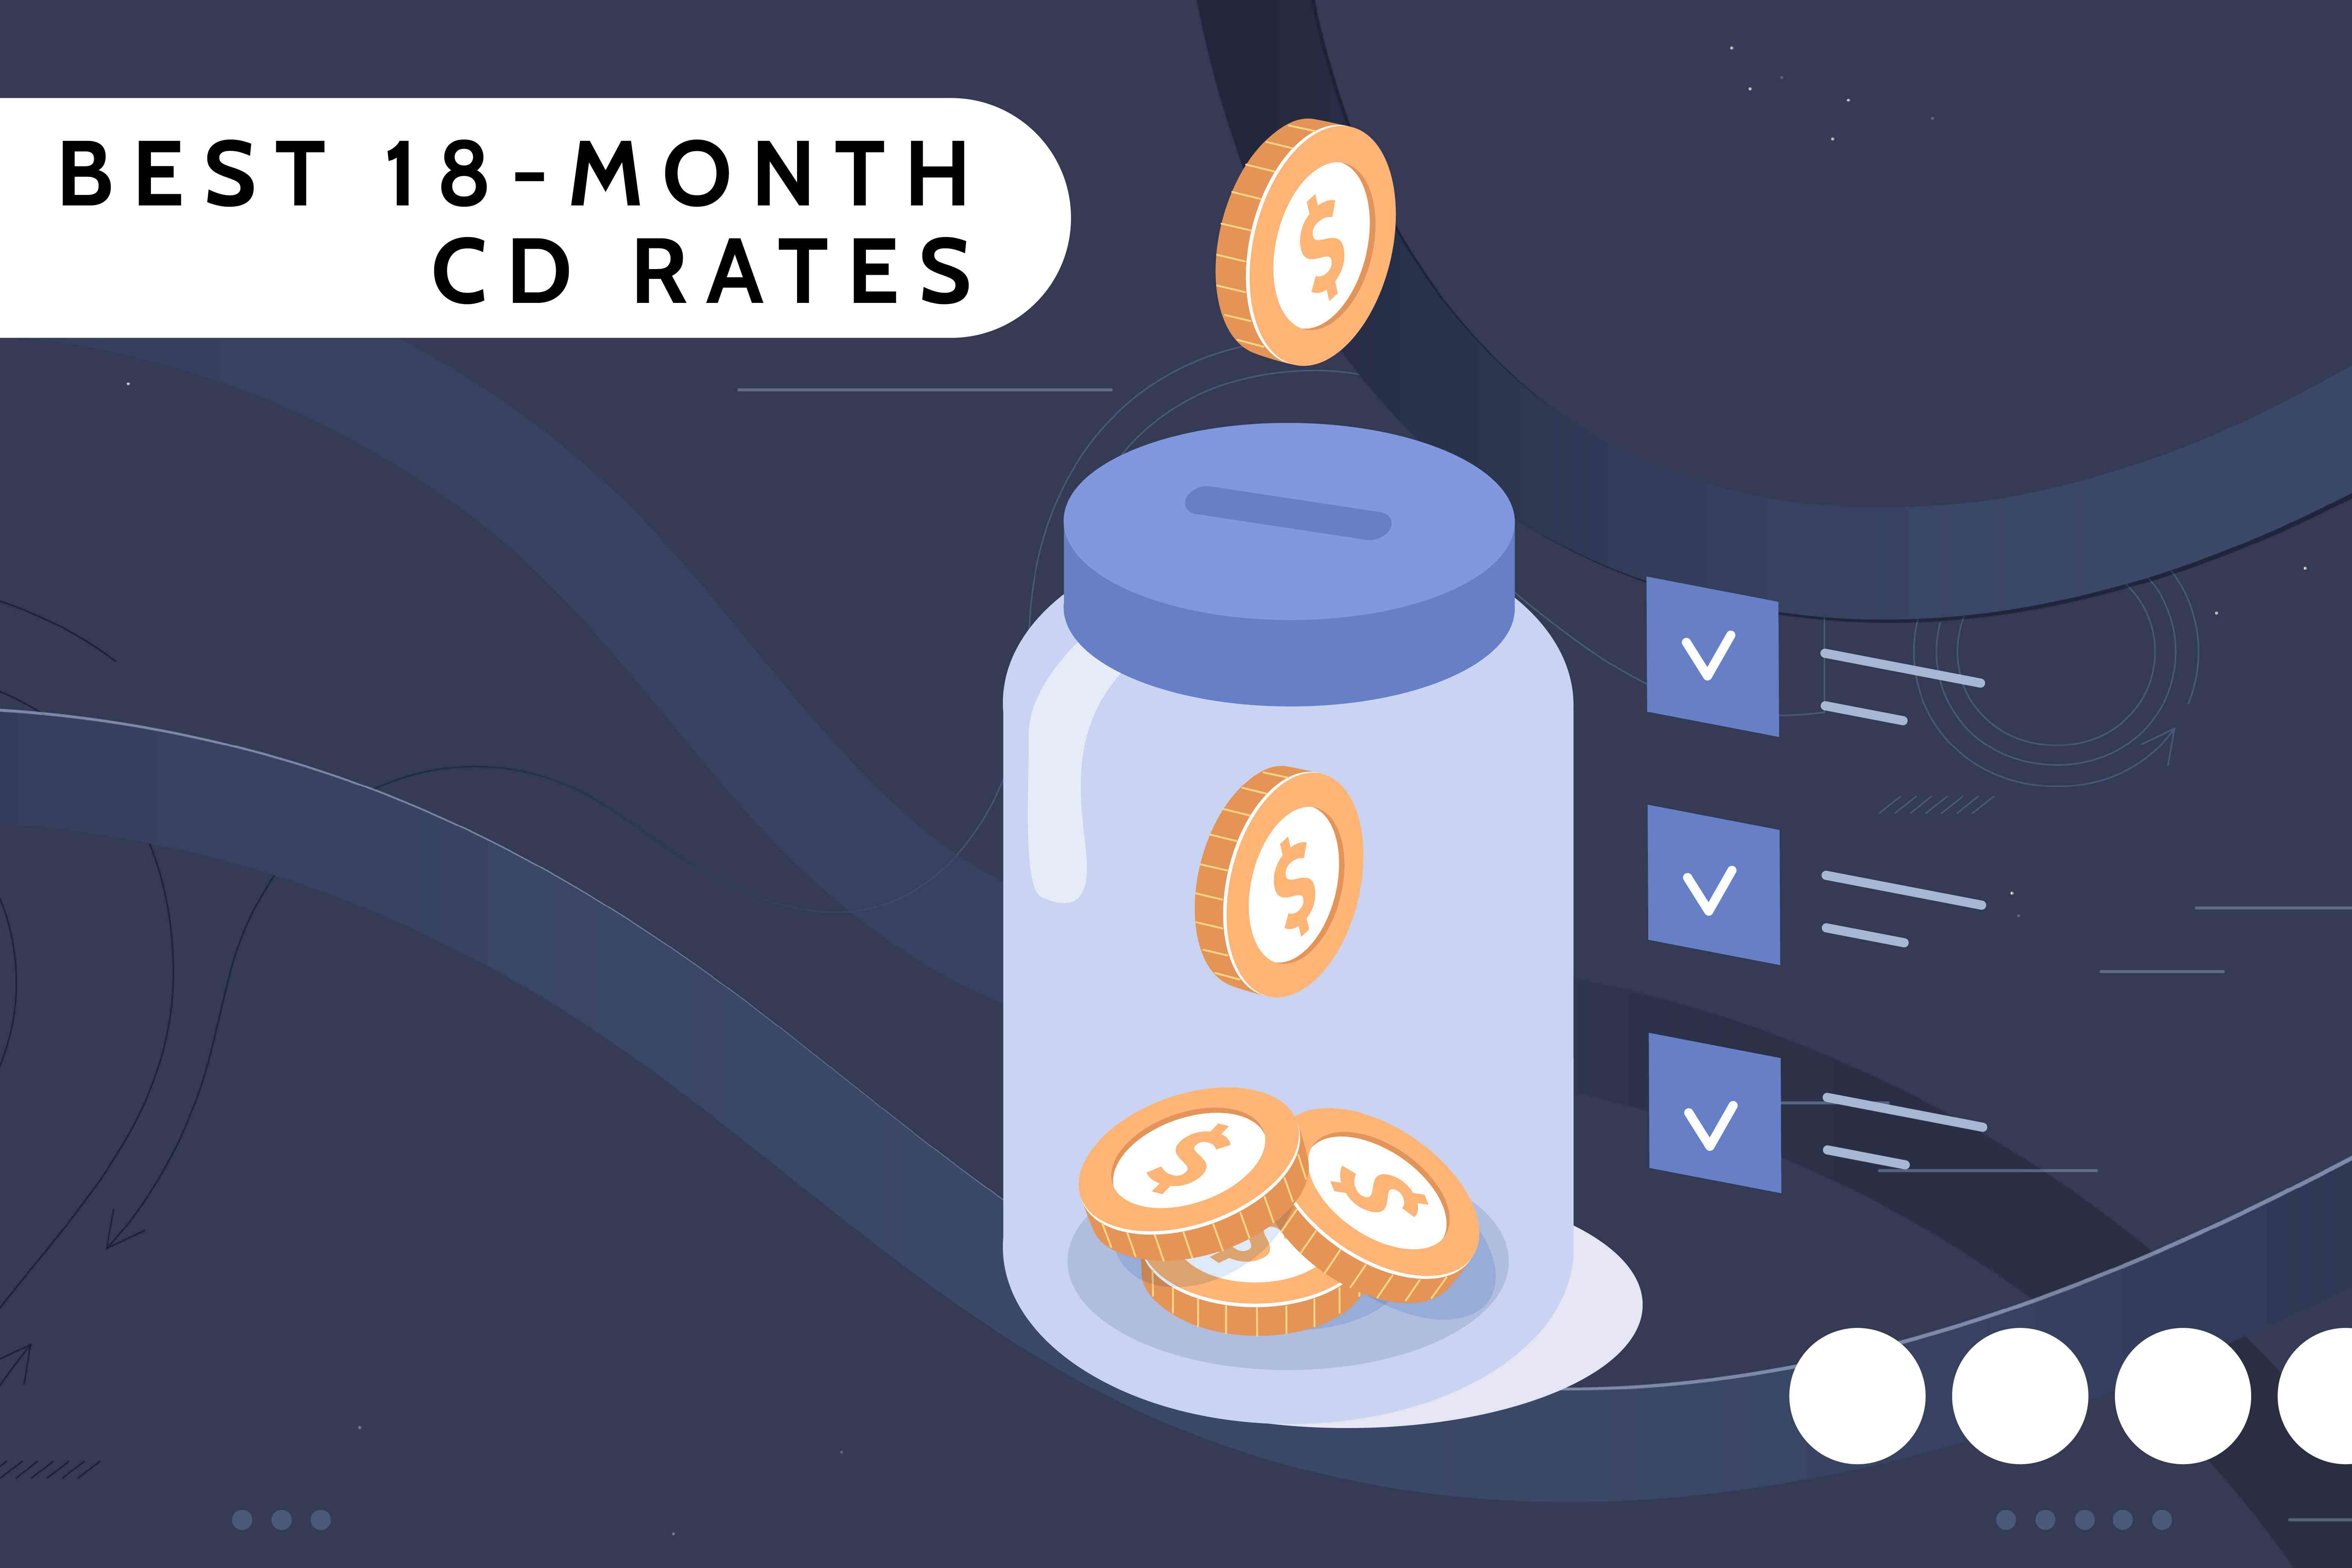 Investopedia custom visual asset shows a change jar with the title Best 18-month CD Rates